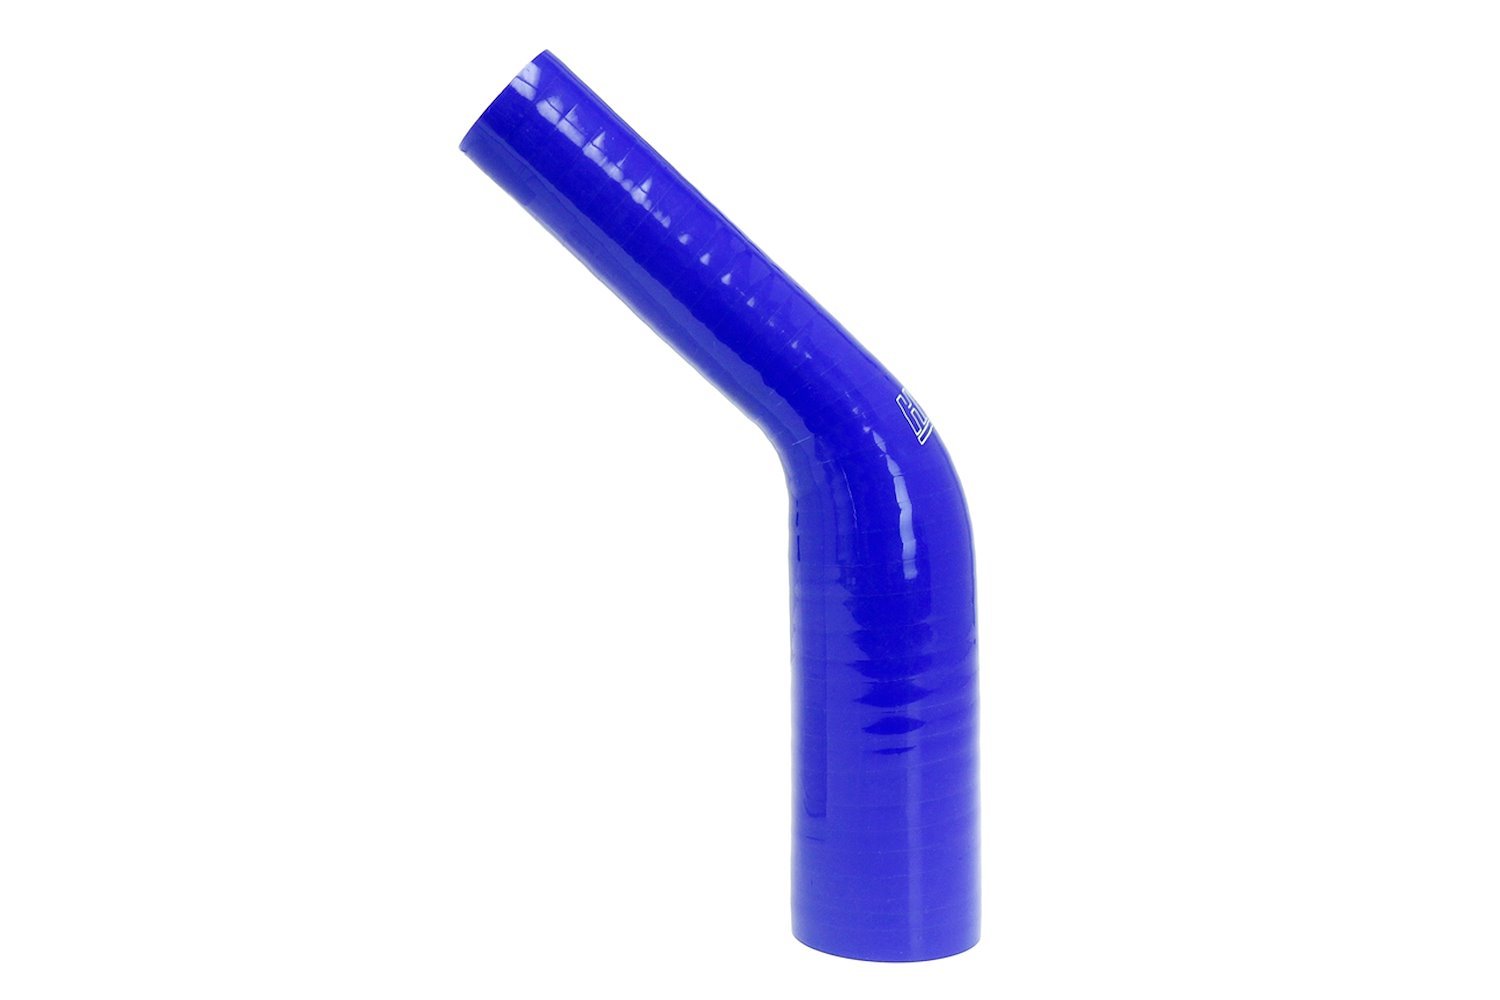 HTSER45-075-087-BLUE Silicone 45-Degree Elbow Hose, High-Temp 4-Ply Reinforced, 3/4 in. - 7/8 in. ID, Blue